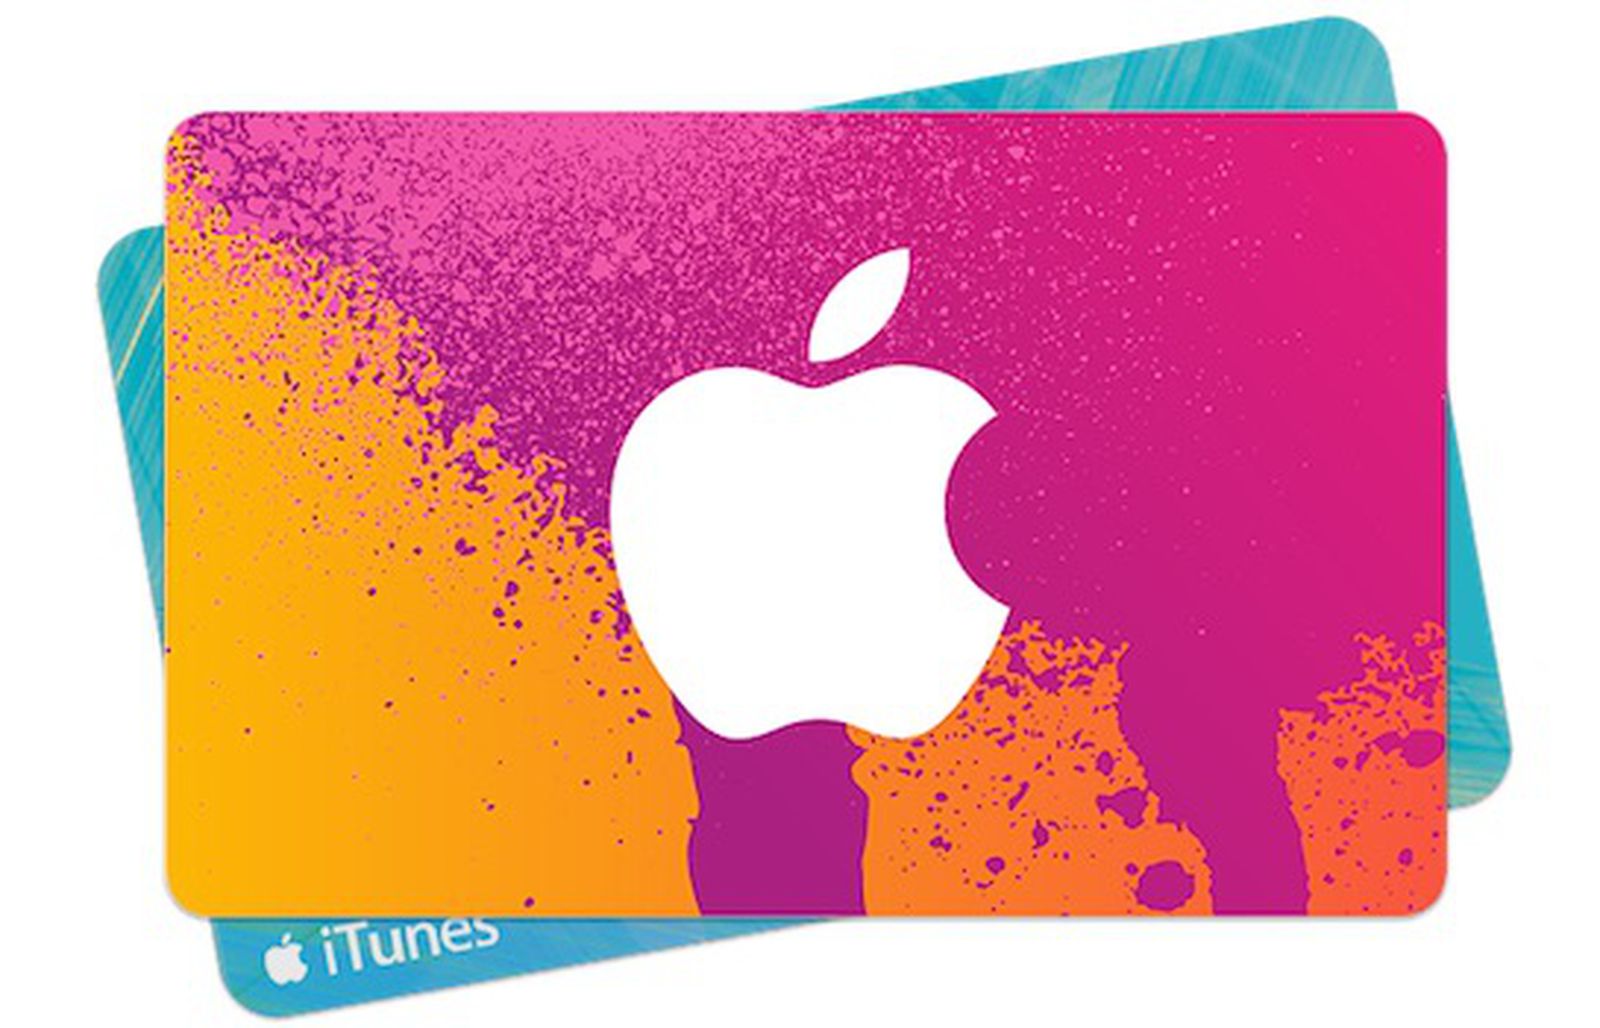 What to Buy With the iTunes Card You Unwrapped Today - MacRumors